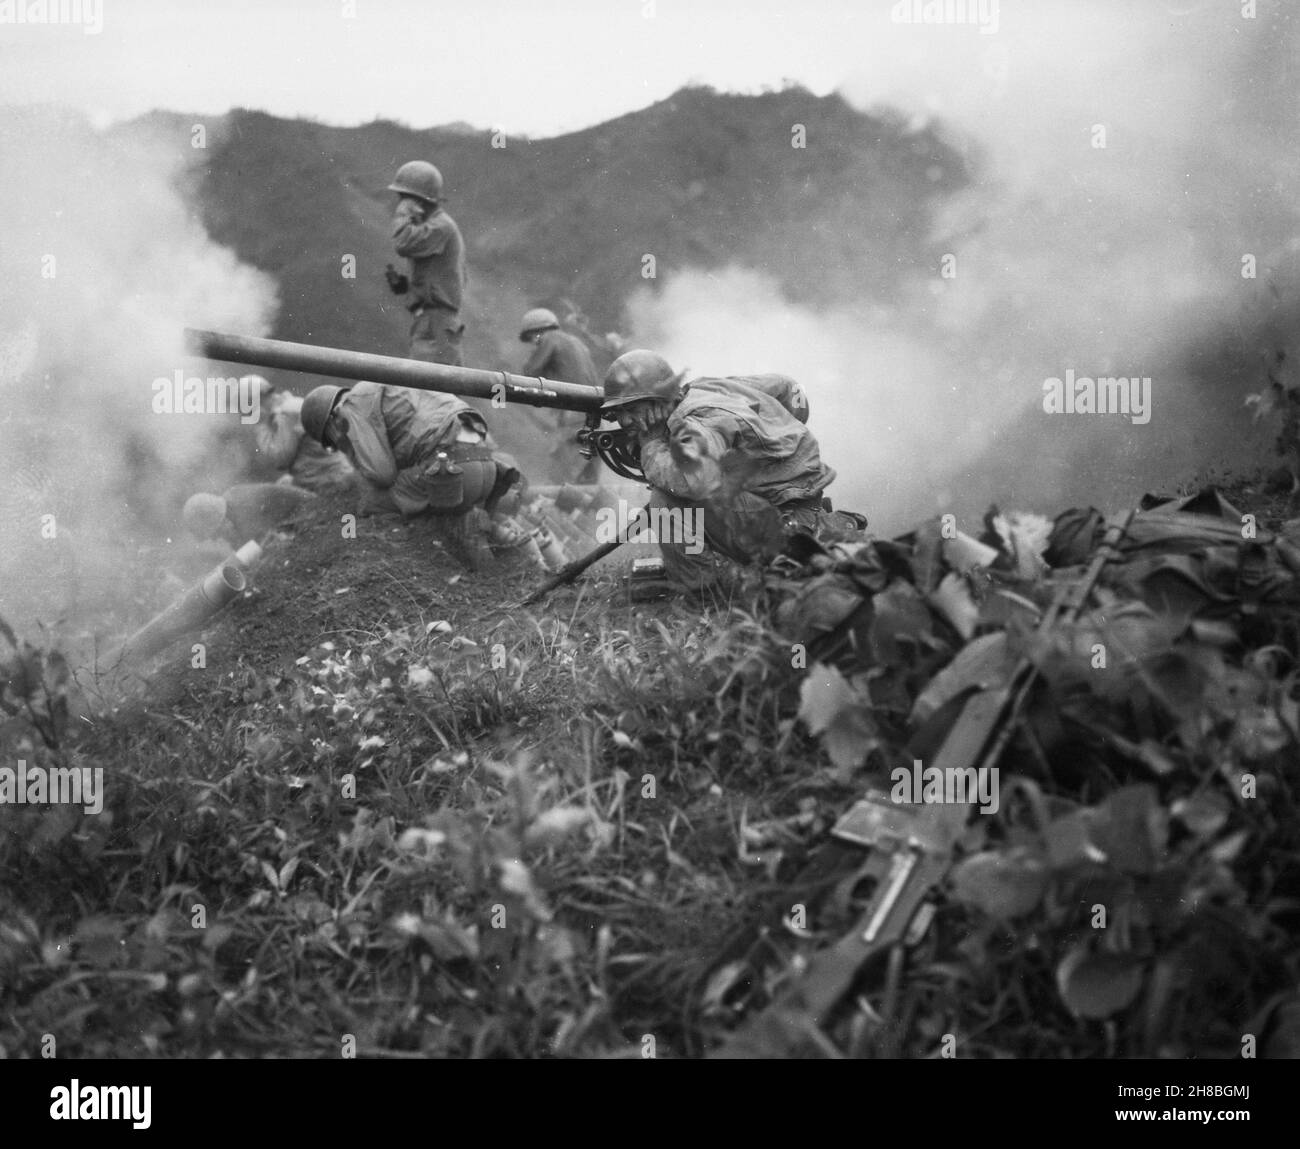 OETLOOK-TONG, KOREA - 09 June 1951 - US Army Private First Class Roman Prauty, a gunner with 31st Regimental Combat Team (crouching foreground), with Stock Photo